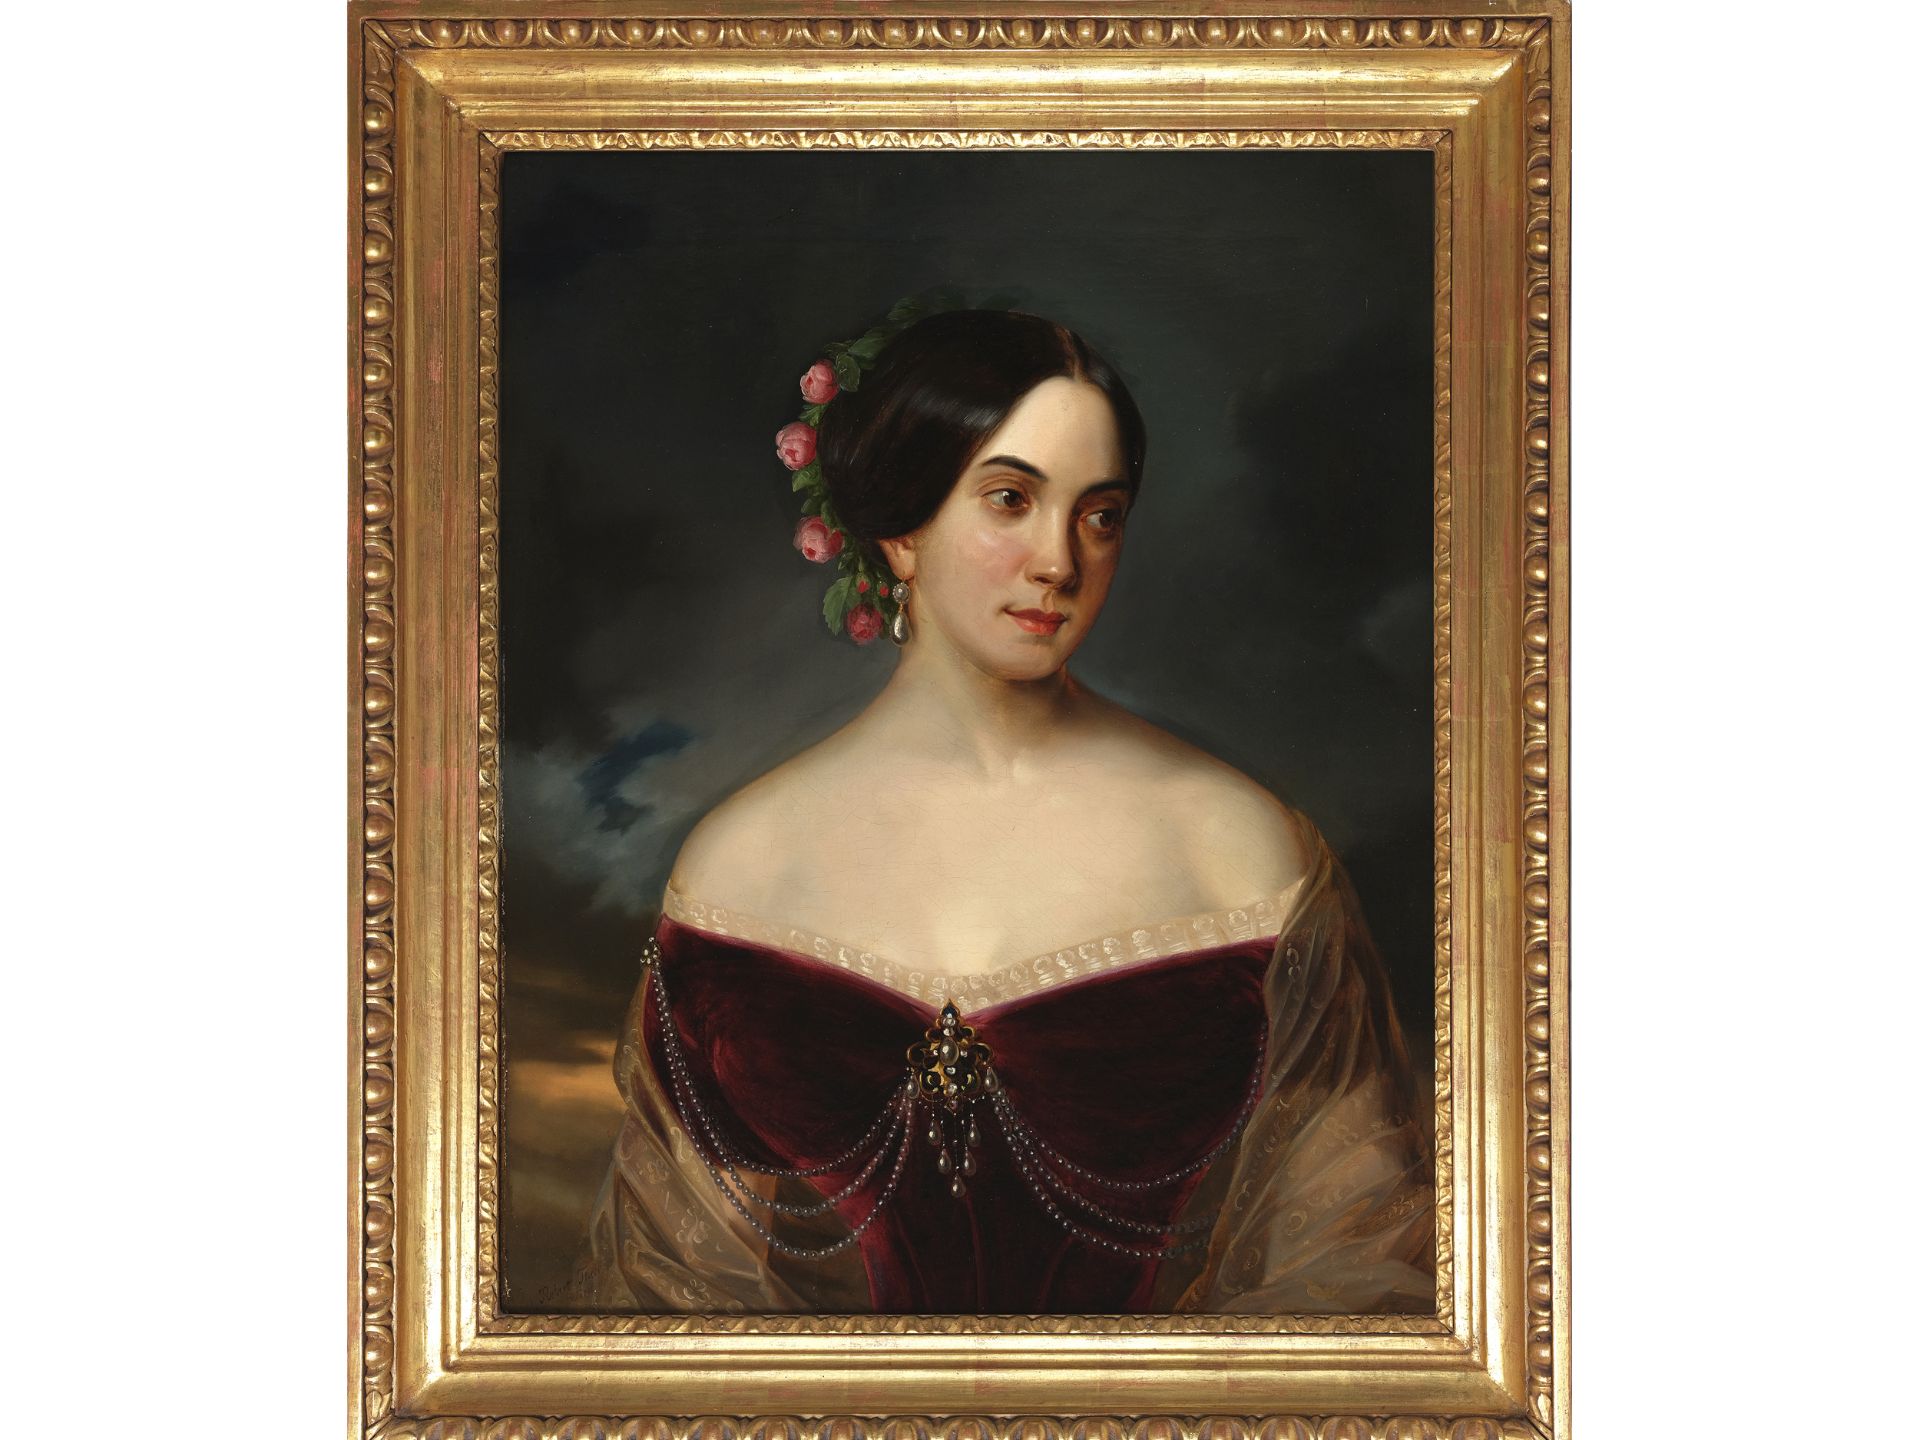 Robert Theer, Johannisberg 1808 - 1863 Vienna, Portrait of a young lady - Image 2 of 5